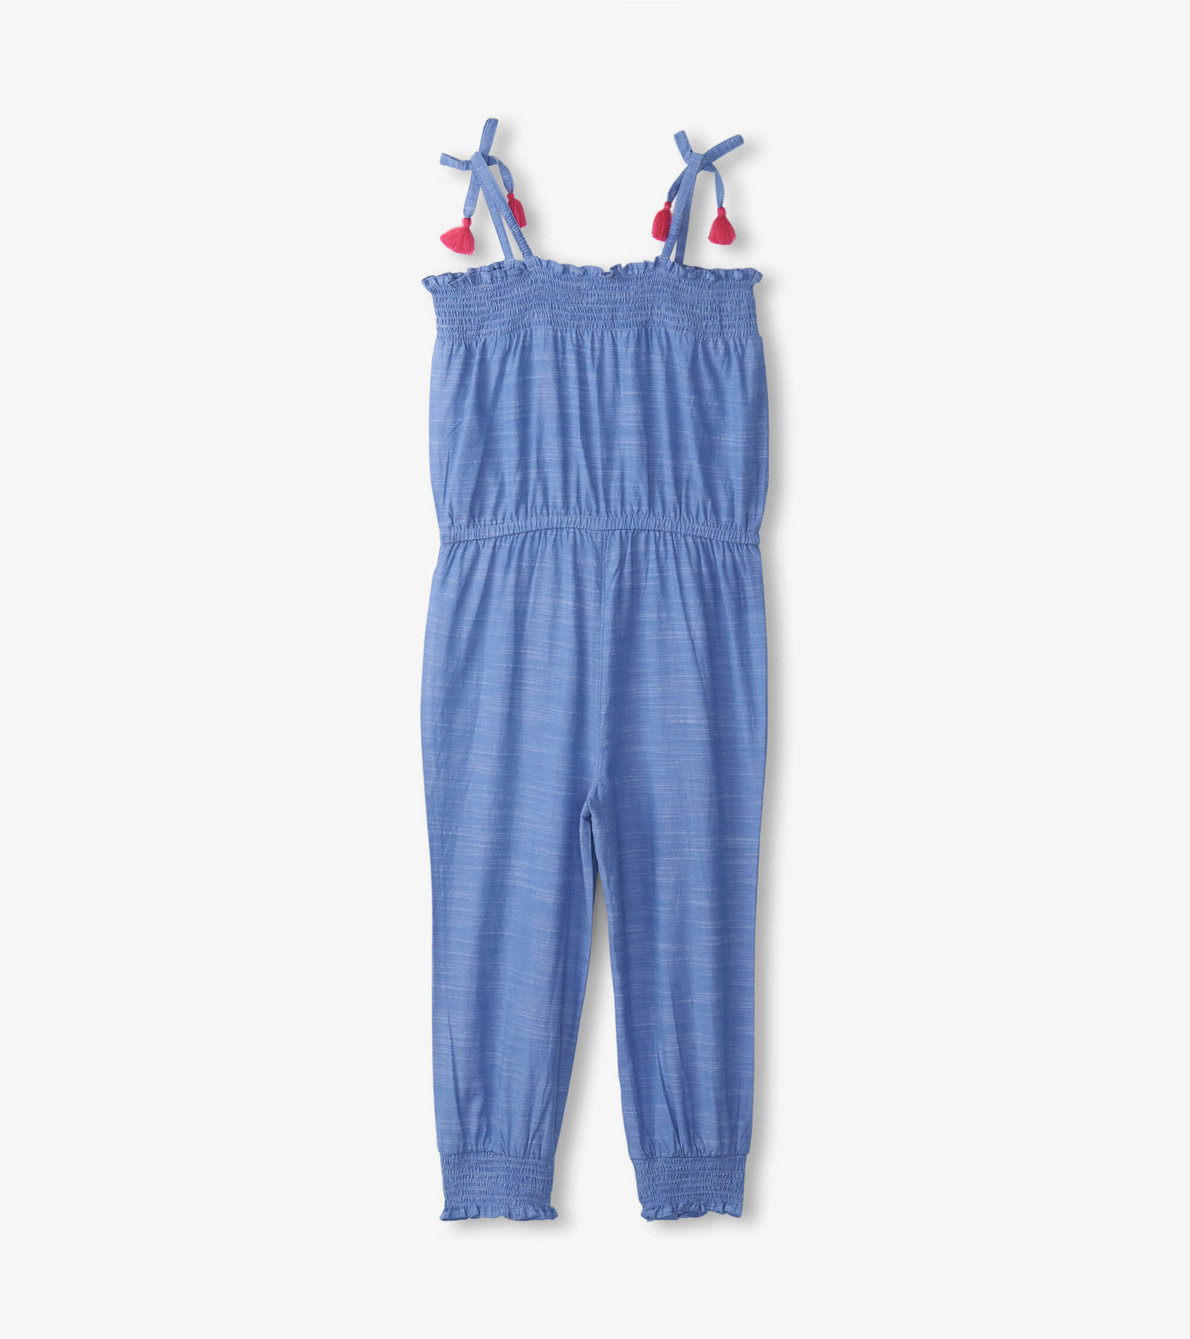 View larger image of Girls Chambray Smocked Jumpsuit